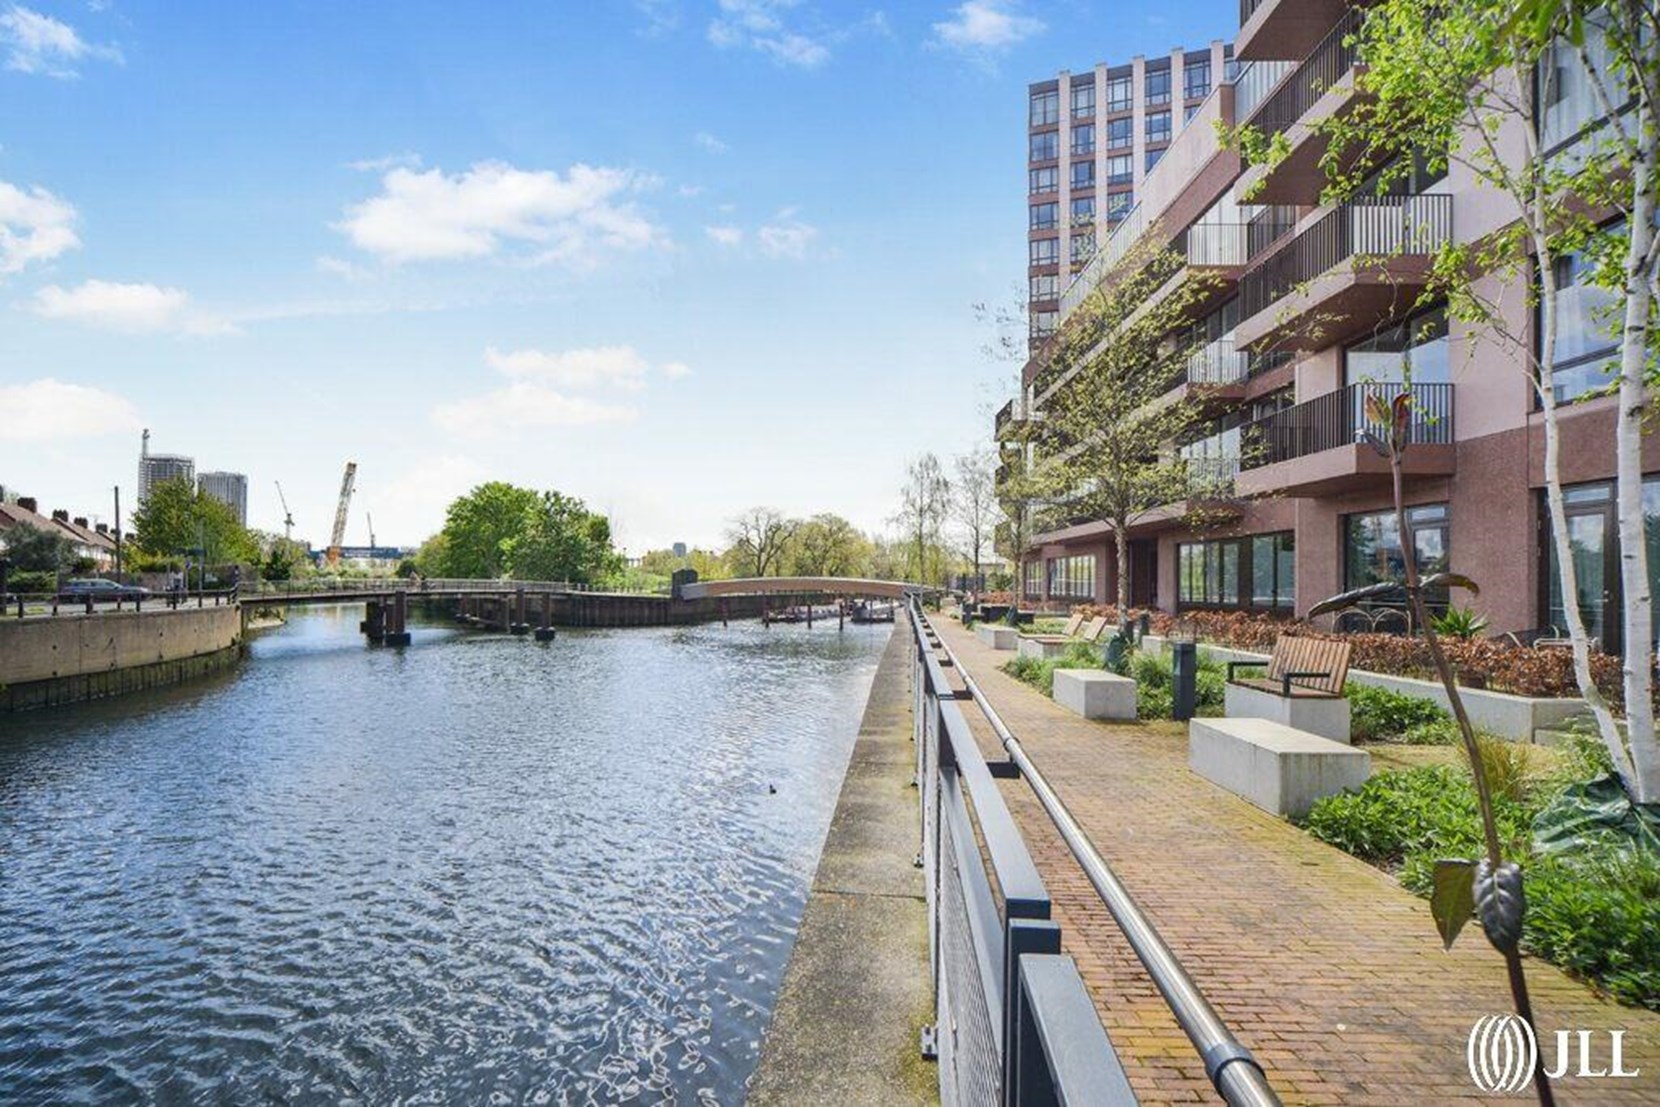 Houses and Apartments to Rent by JLL at Sugar House Island, Newham, E15, building panoramic